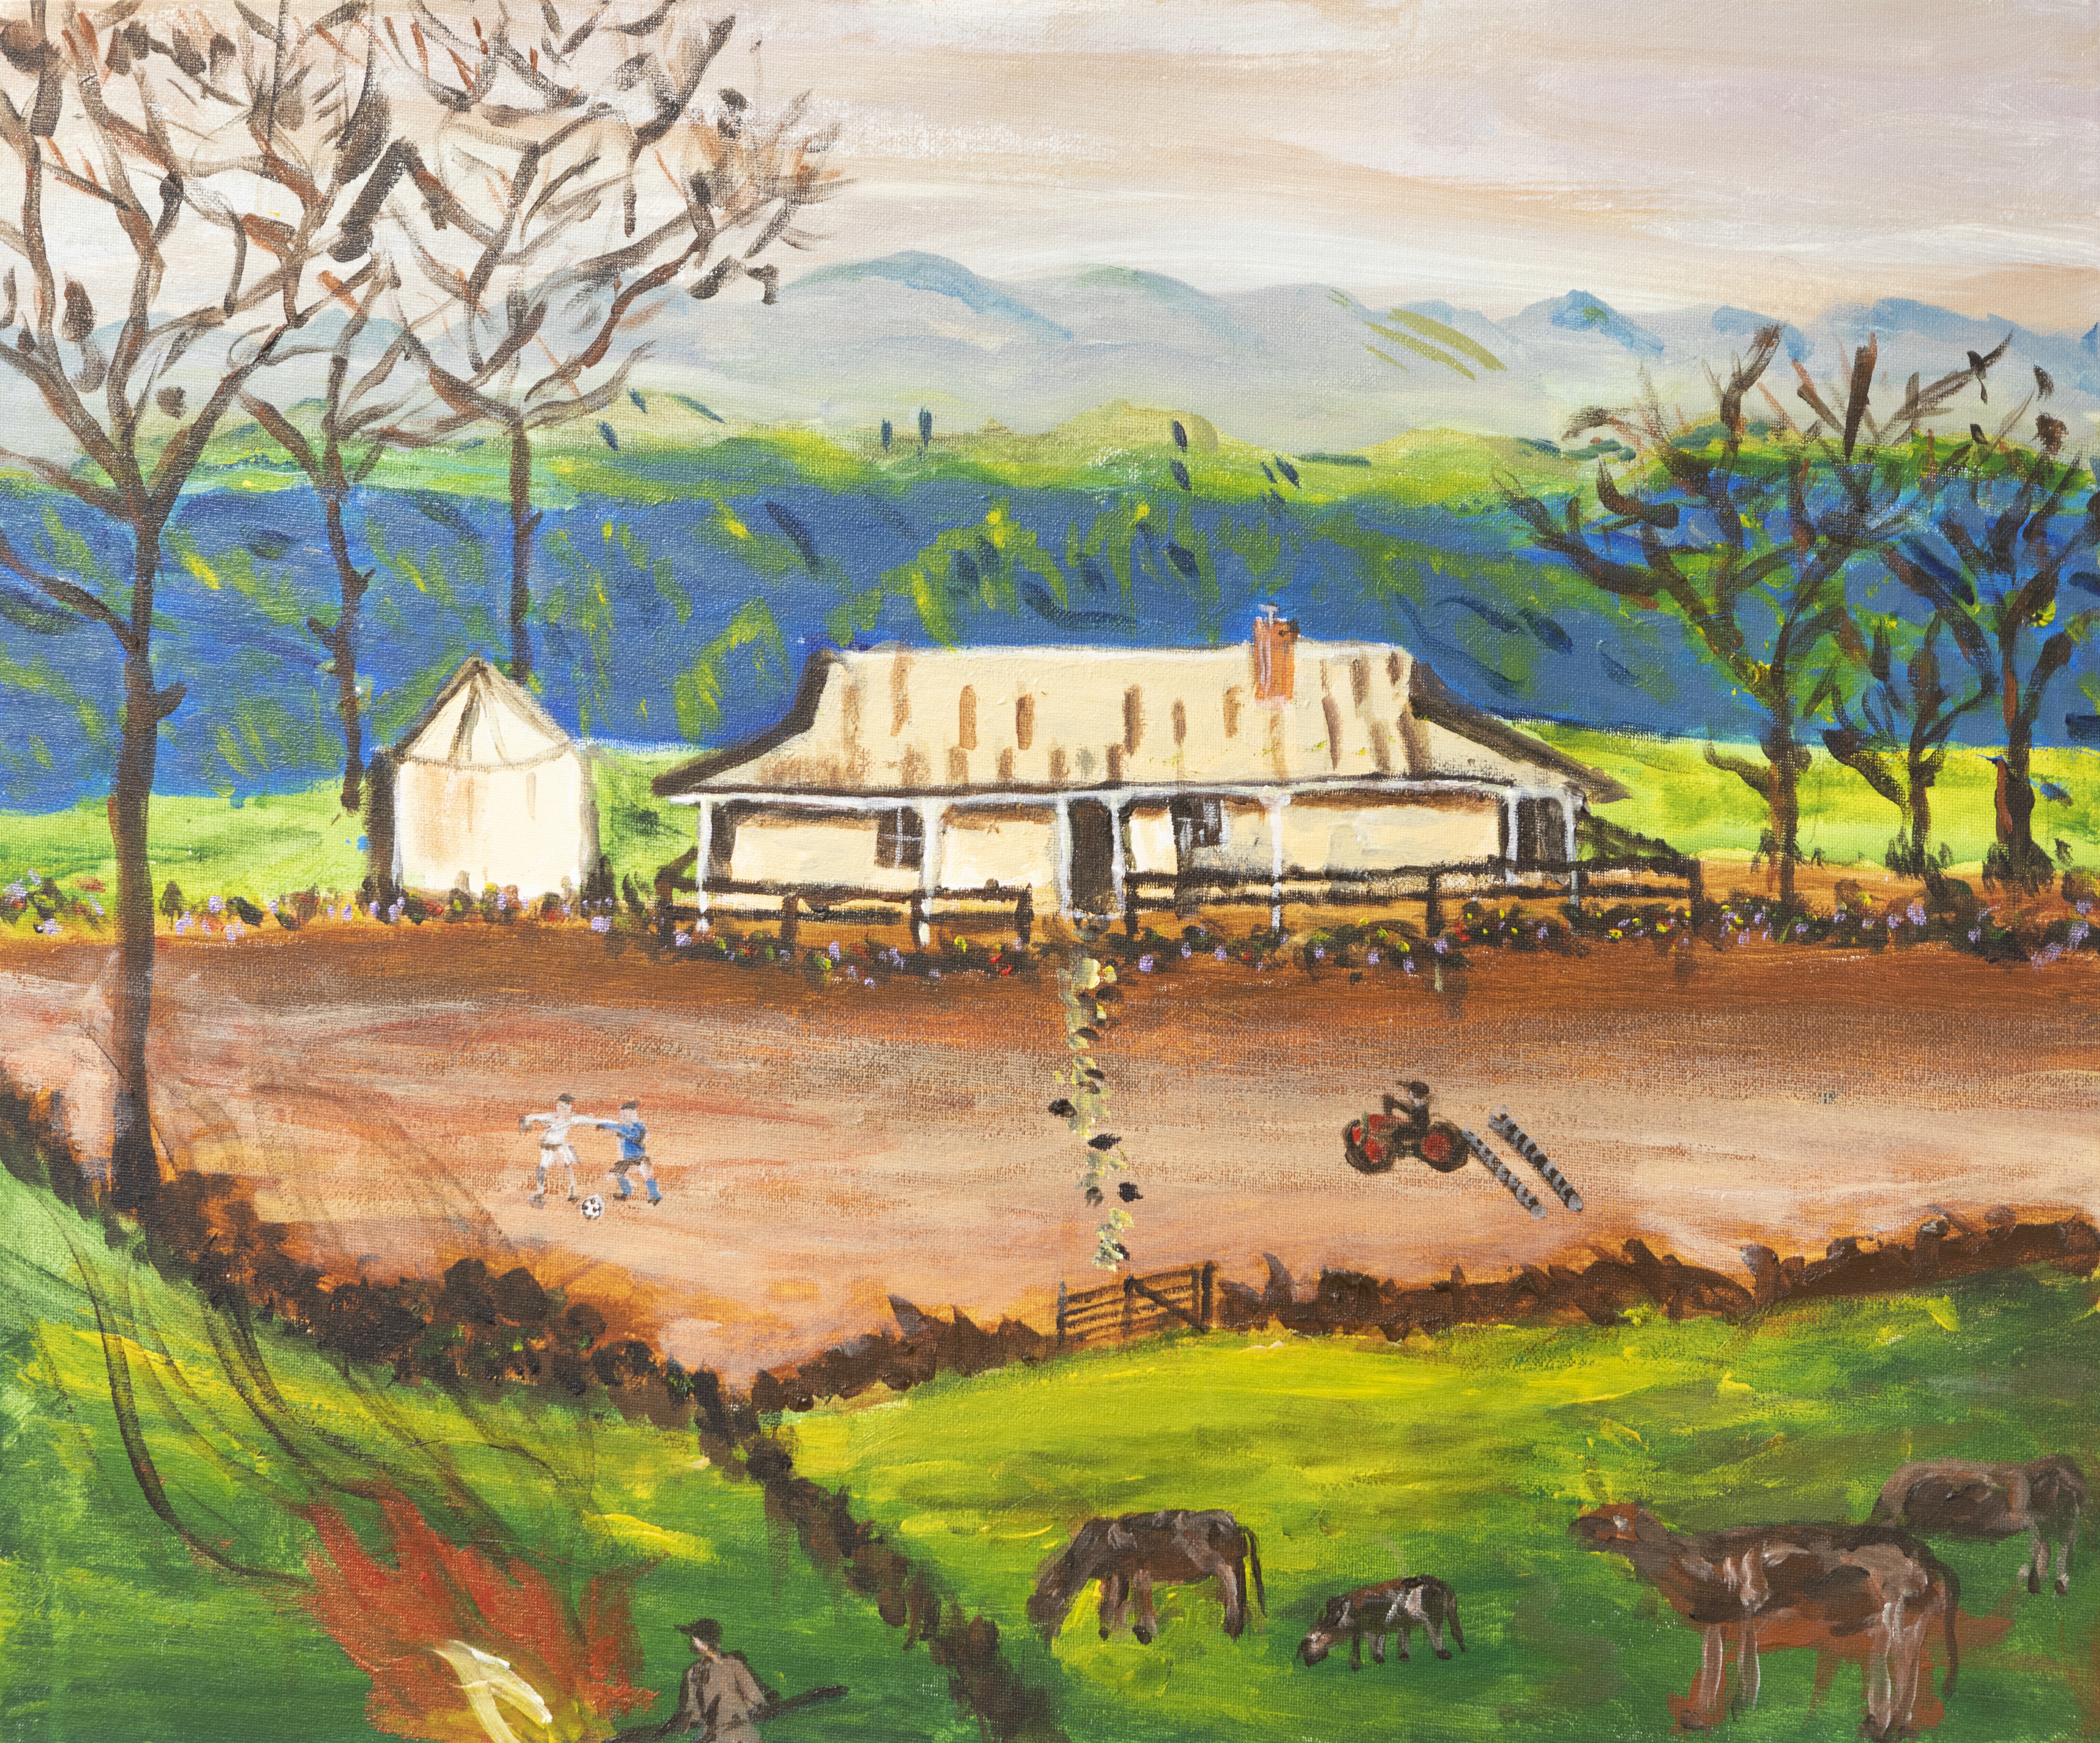 A scene of farm life. At the centre of the painting is a corrugated roof homestead. Behind the house are green pastures and hills in the distance. In front of the house is a rock pathway that leads from the front door across a paddock of brown soil being tilled by a tractor. On the other side of the paddock, two kids are playing soccer. The path continues towards a gate and a grass green paddock where horses and cows graze. In the paddock next door, a man stokes a large bonfire.